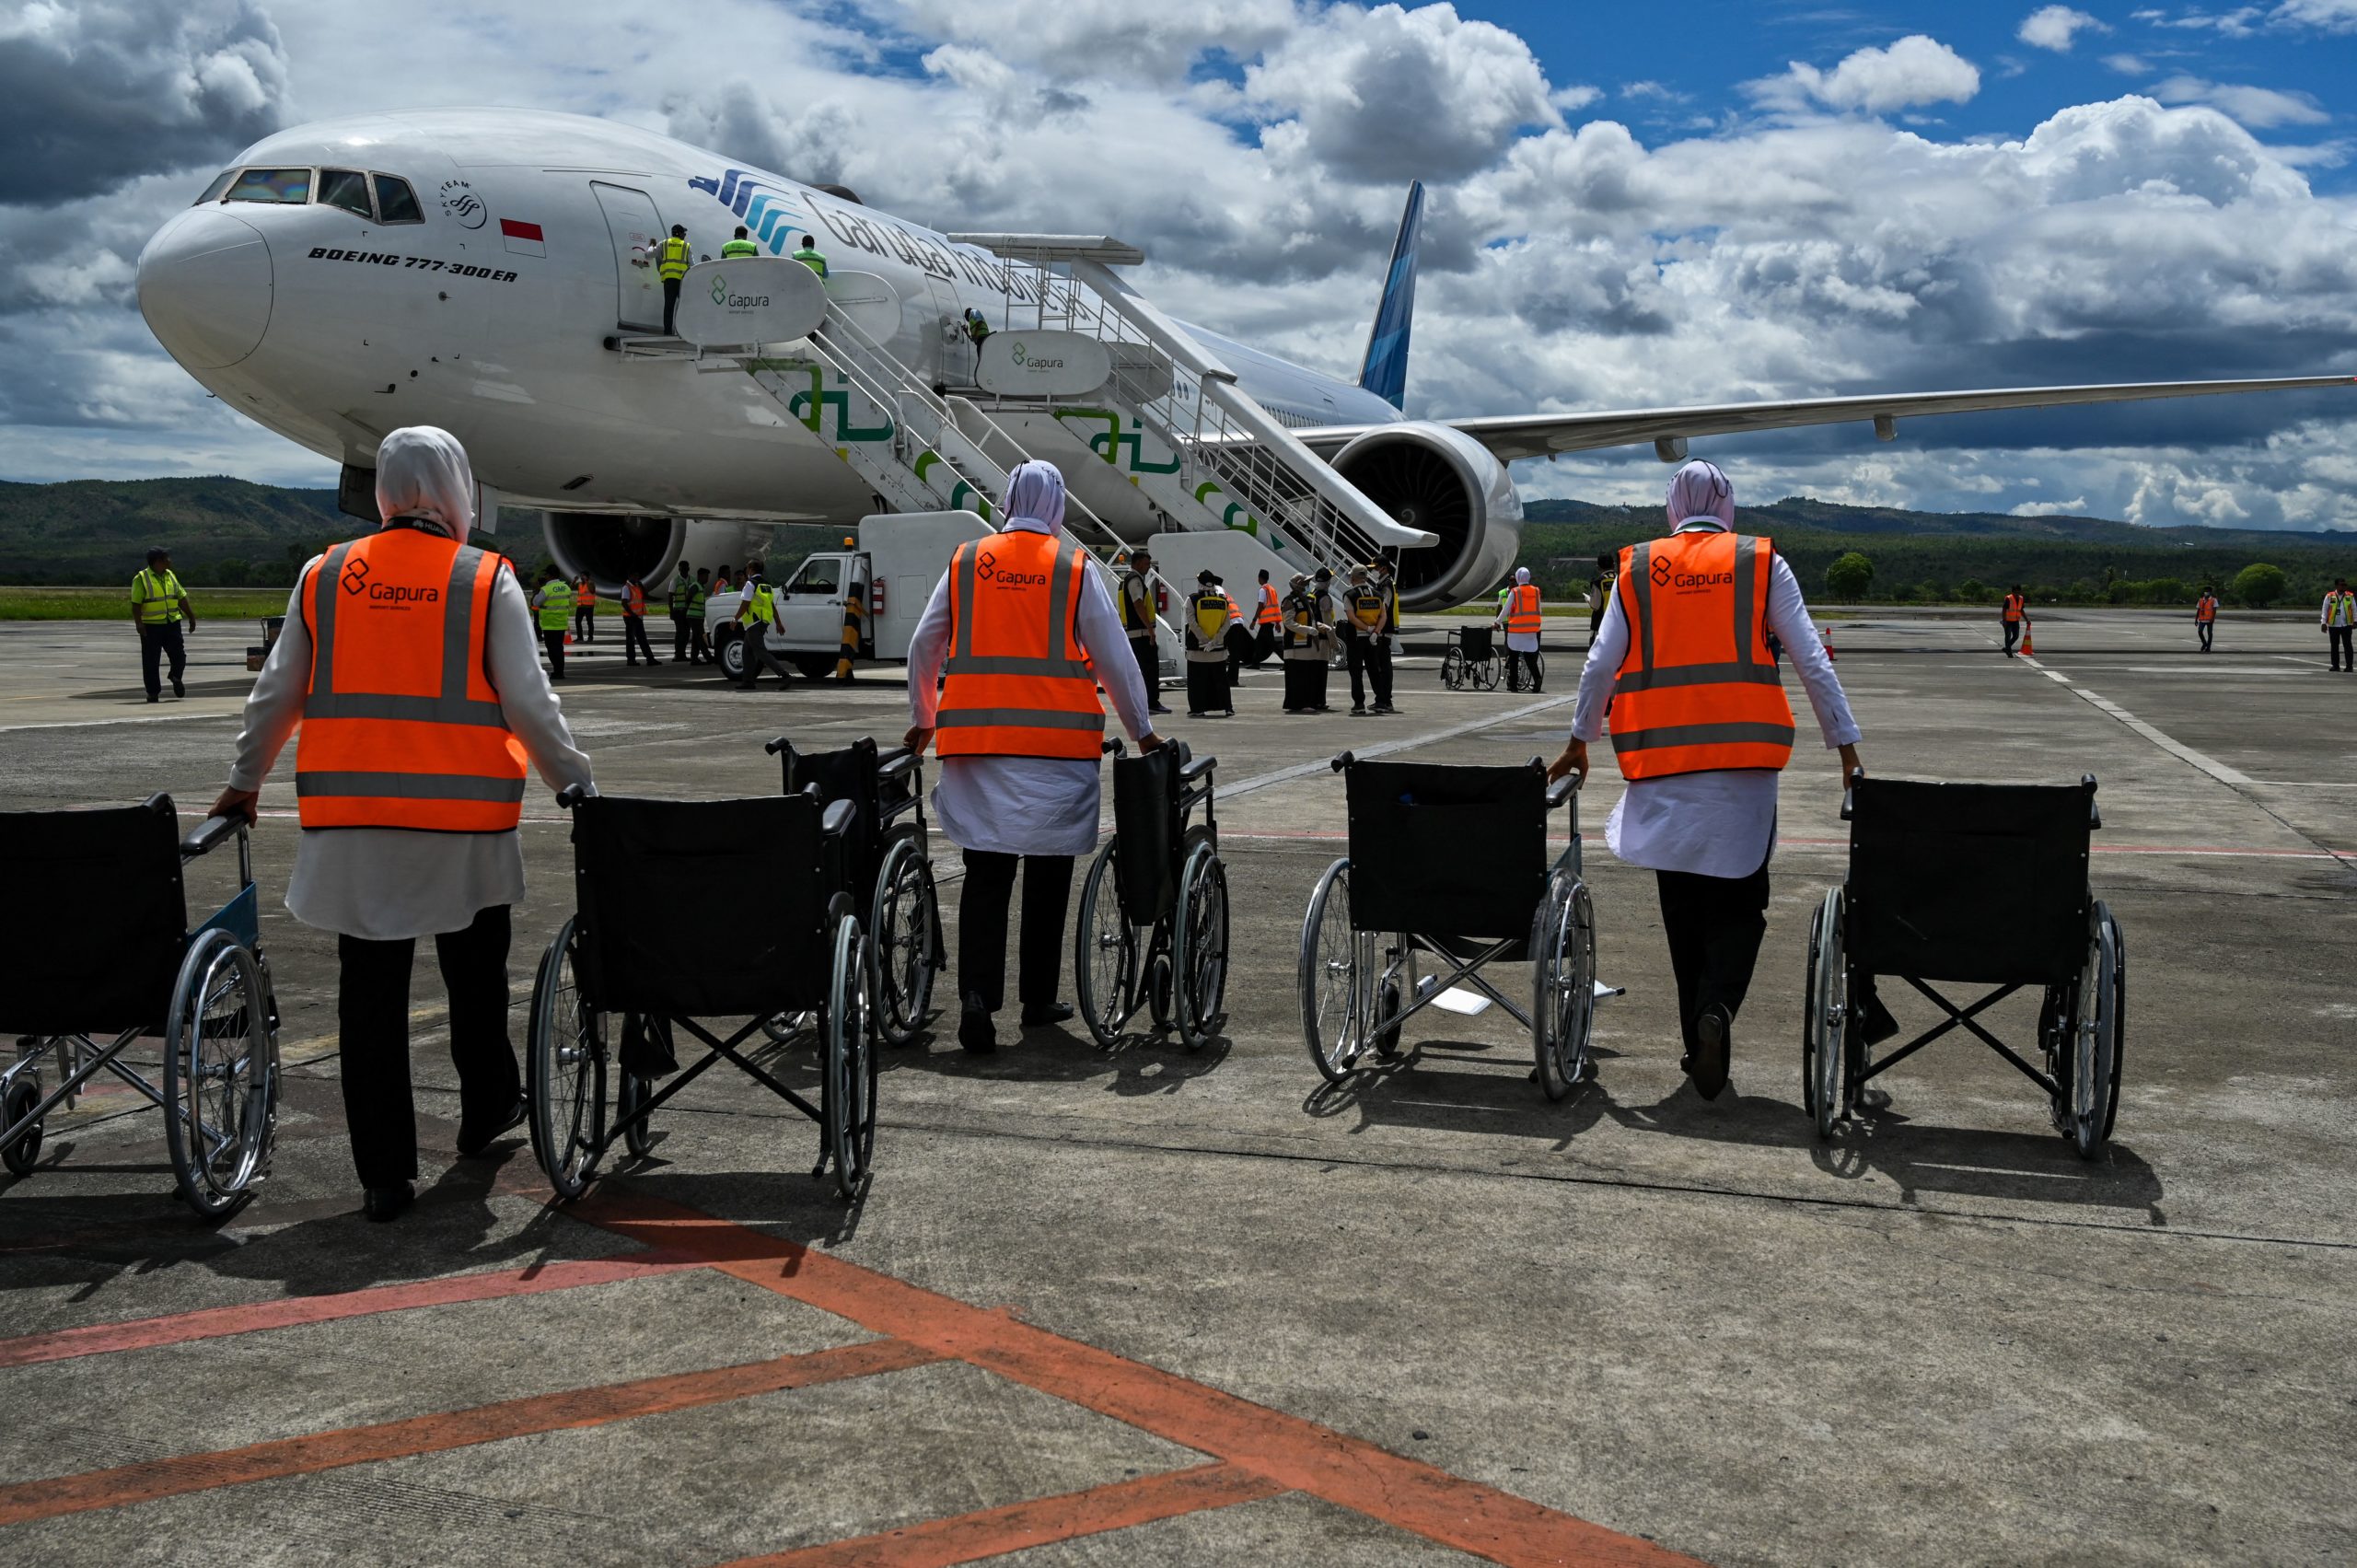 Members of ground staff along with wheelchairs, wait for Indonesian Muslim pilgrims to disembark from a passenger plane upon their arrival at the Sultan Iskandar Muda International Airport in Blang Bintang, Aceh province on July 31, 2023, after performing the annual Hajj pilgrimage. (Photo by CHAIDEER MAHYUDDIN/AFP via Getty Images)